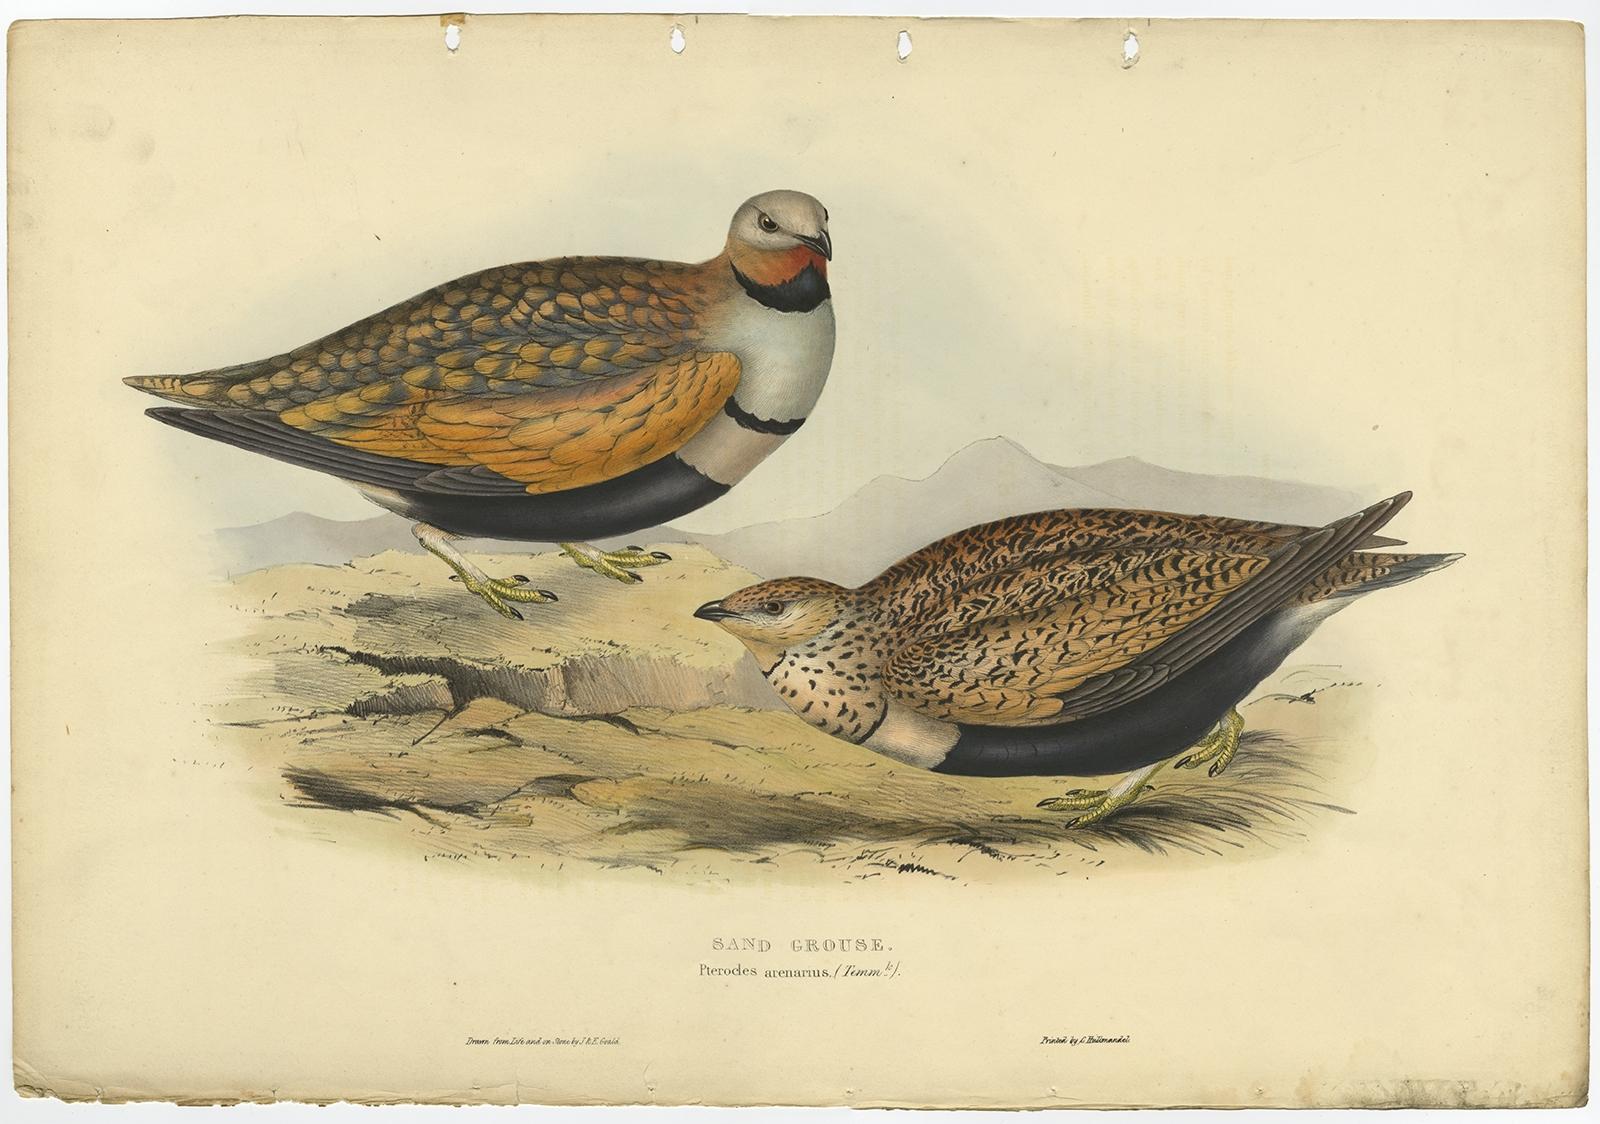 Description: Antique bird print titled 'Sand Grouse (Pterocles arenarius).' 

This plate shows the Sandgrouse. These birds from the Pteroclididae family are expertly hand-colored. John Gould: 